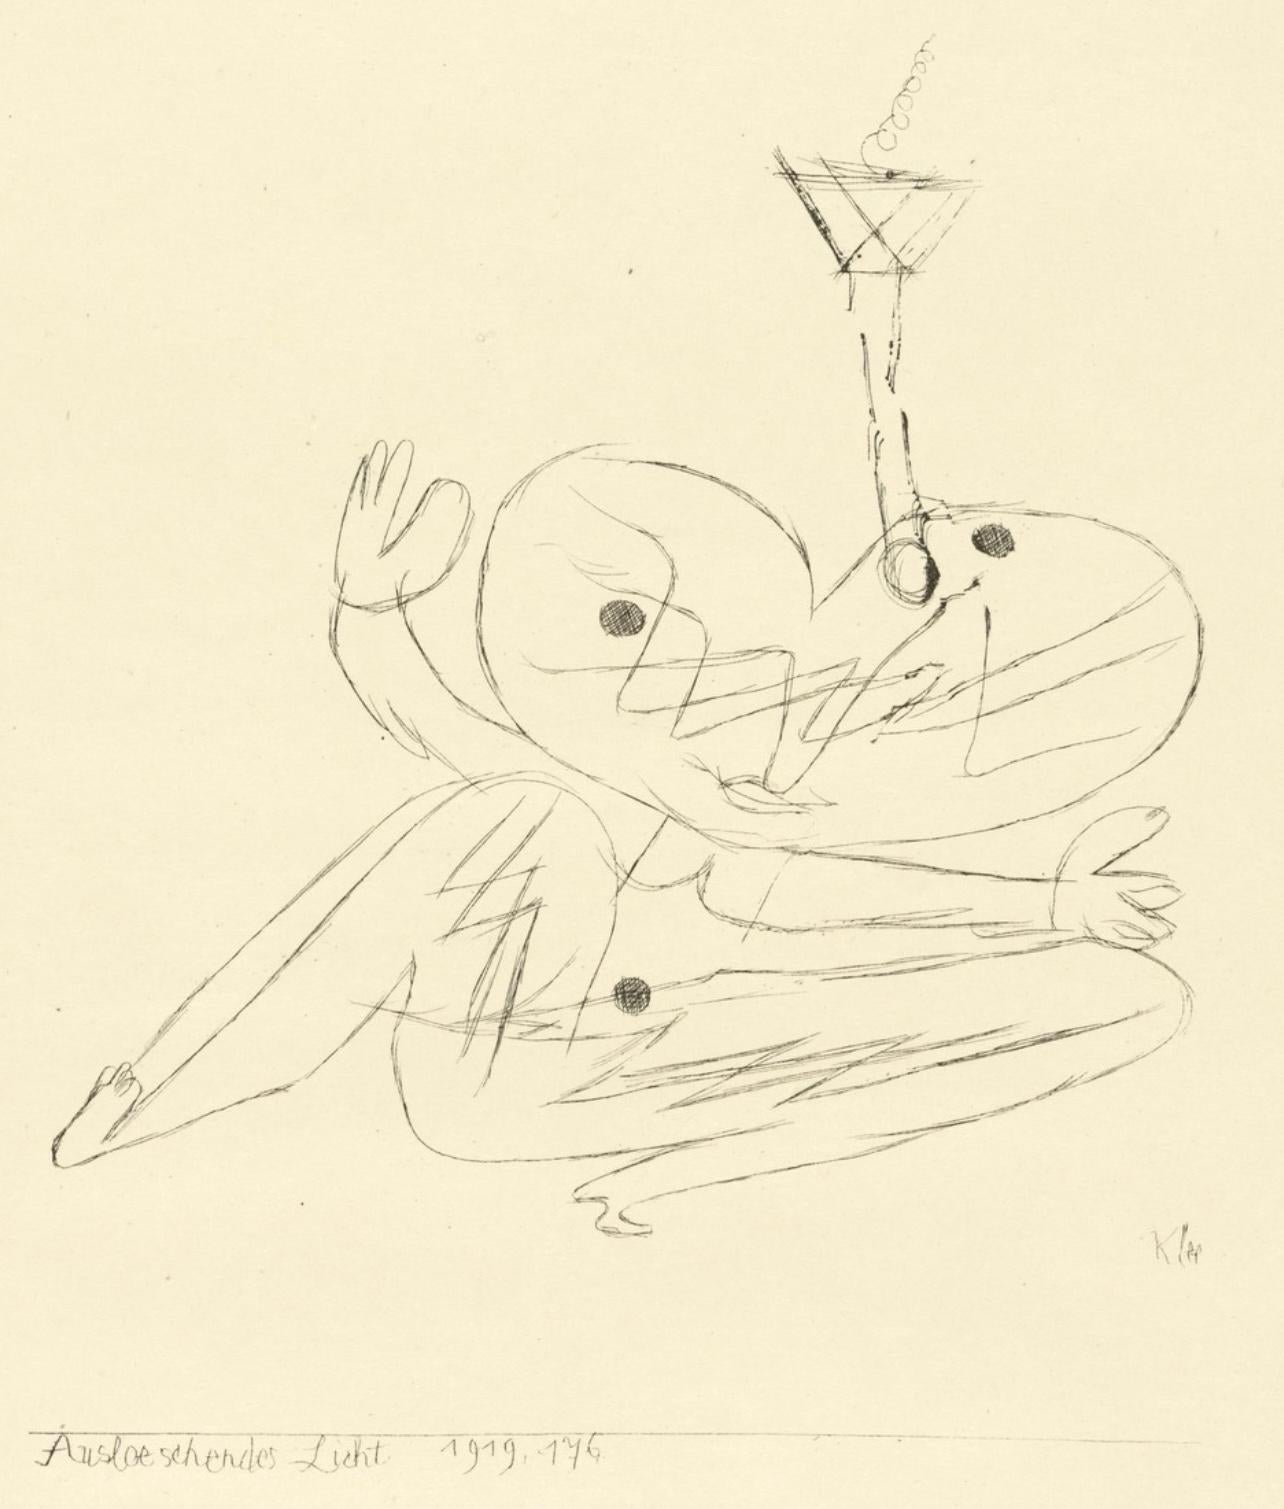 Original Limited Edition Etching on vellum paper. Inscription: Unsigned and unnumbered. Edition: 2,000. Good condition. Notes: From the folio, Prints of Paul Klee, 1947. Published by the Museum of Modern Art, New York; printed by Meriden Gravure